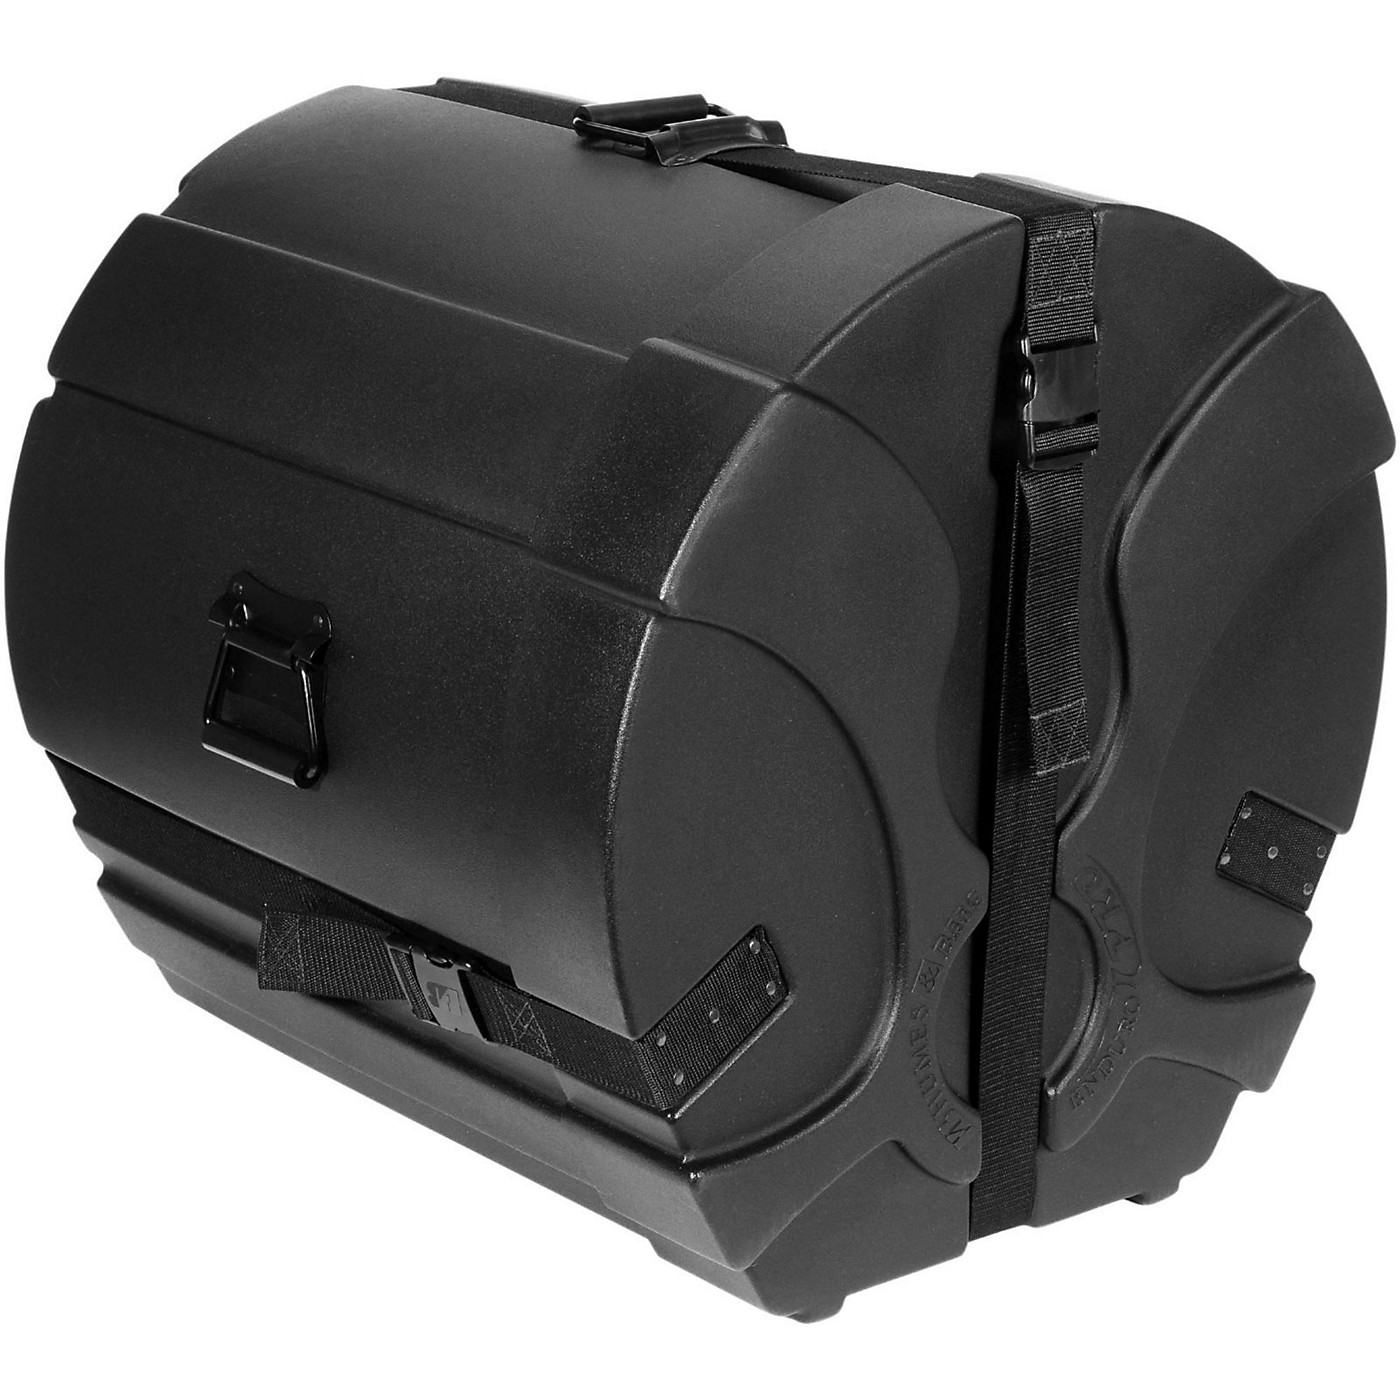 Humes & Berg Enduro Pro Bass Drum Case with Foam thumbnail